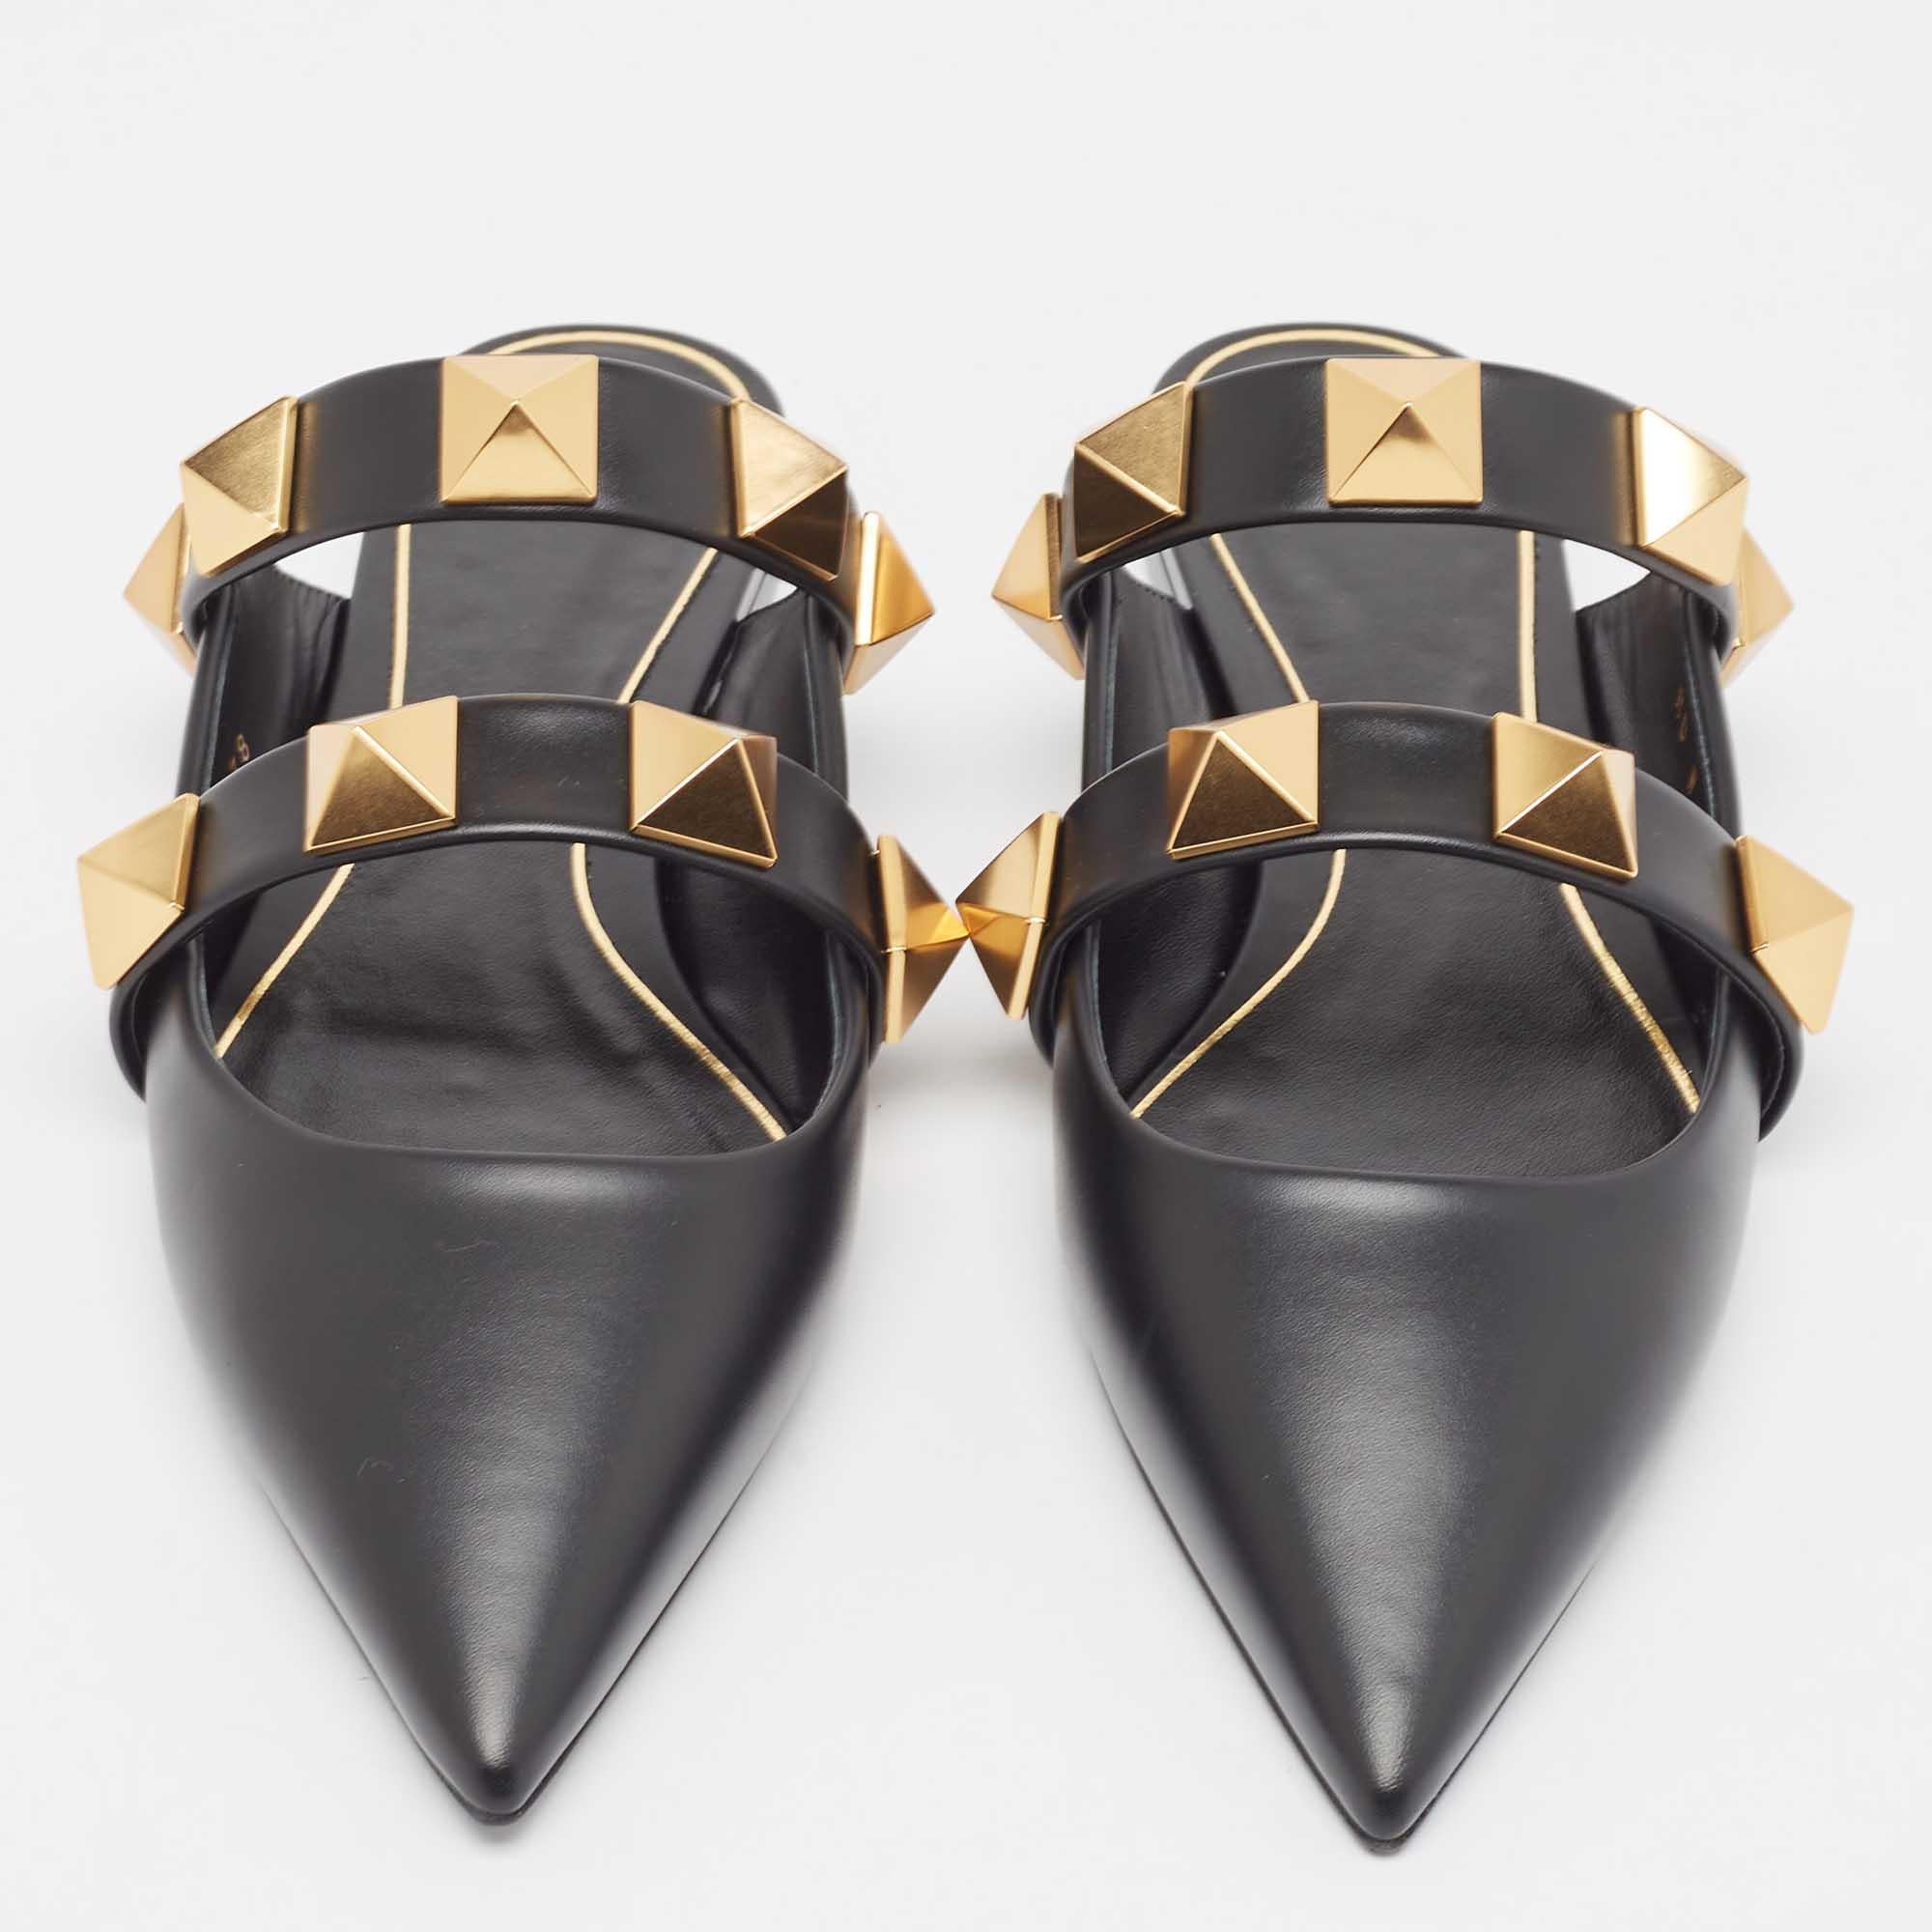 Valentino shoes are known for their unique designs that emanate the label's feminine verve and immaculate craftsmanship that makes their creations last season after season. Crafted from leather, the straps are adorned with the Roman Studs, a